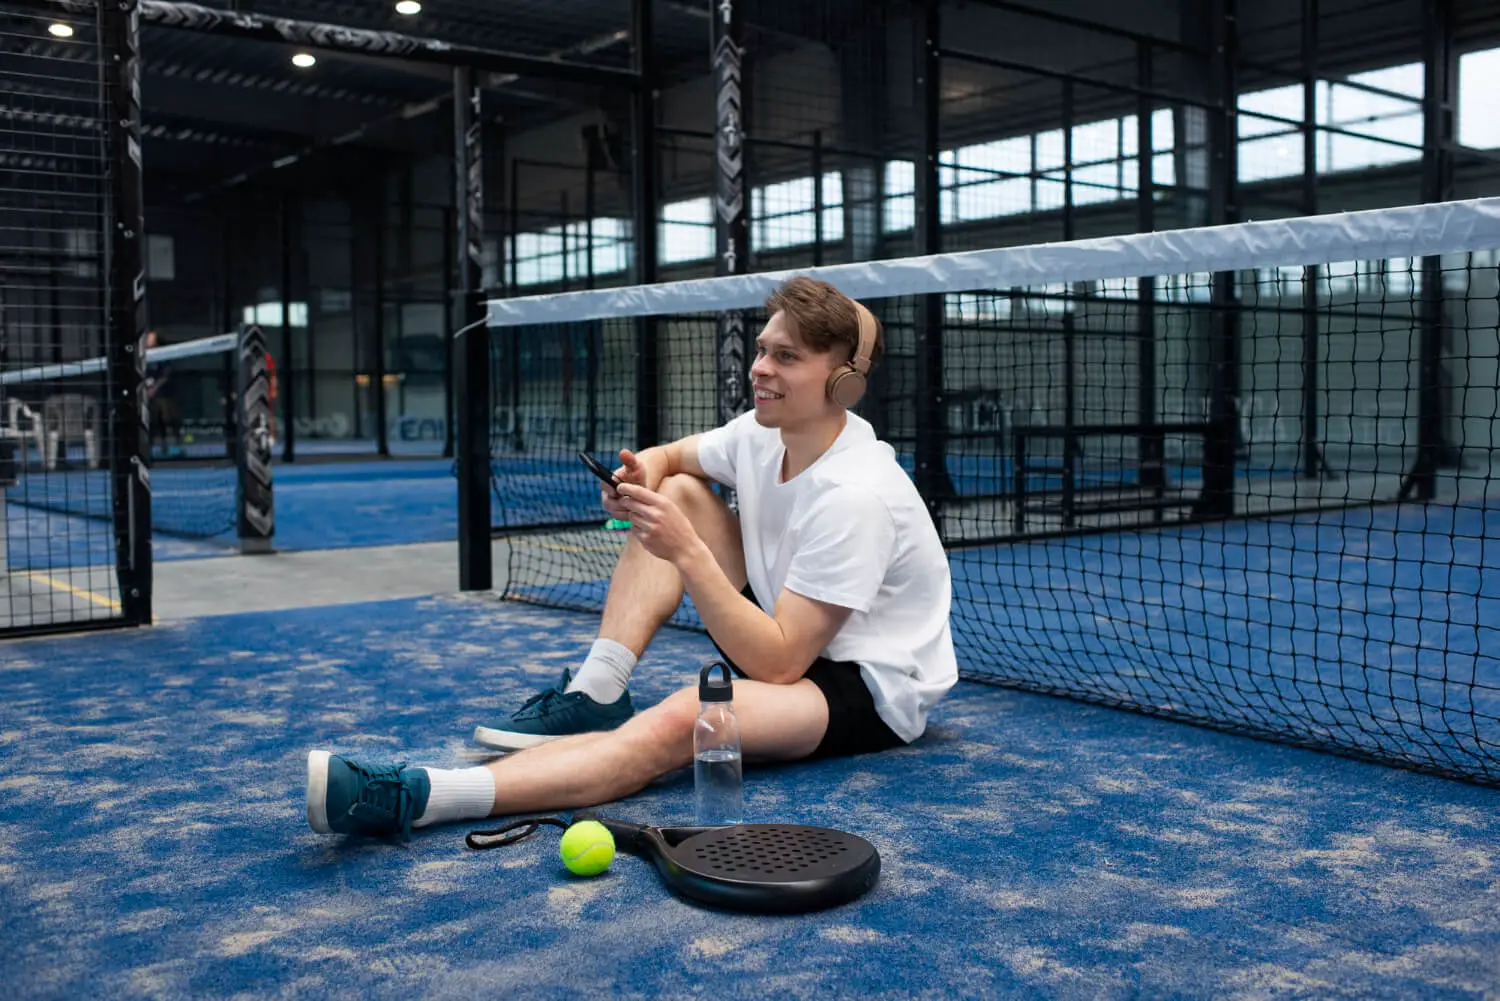 person-getting-ready-play-paddle-tennis-inside